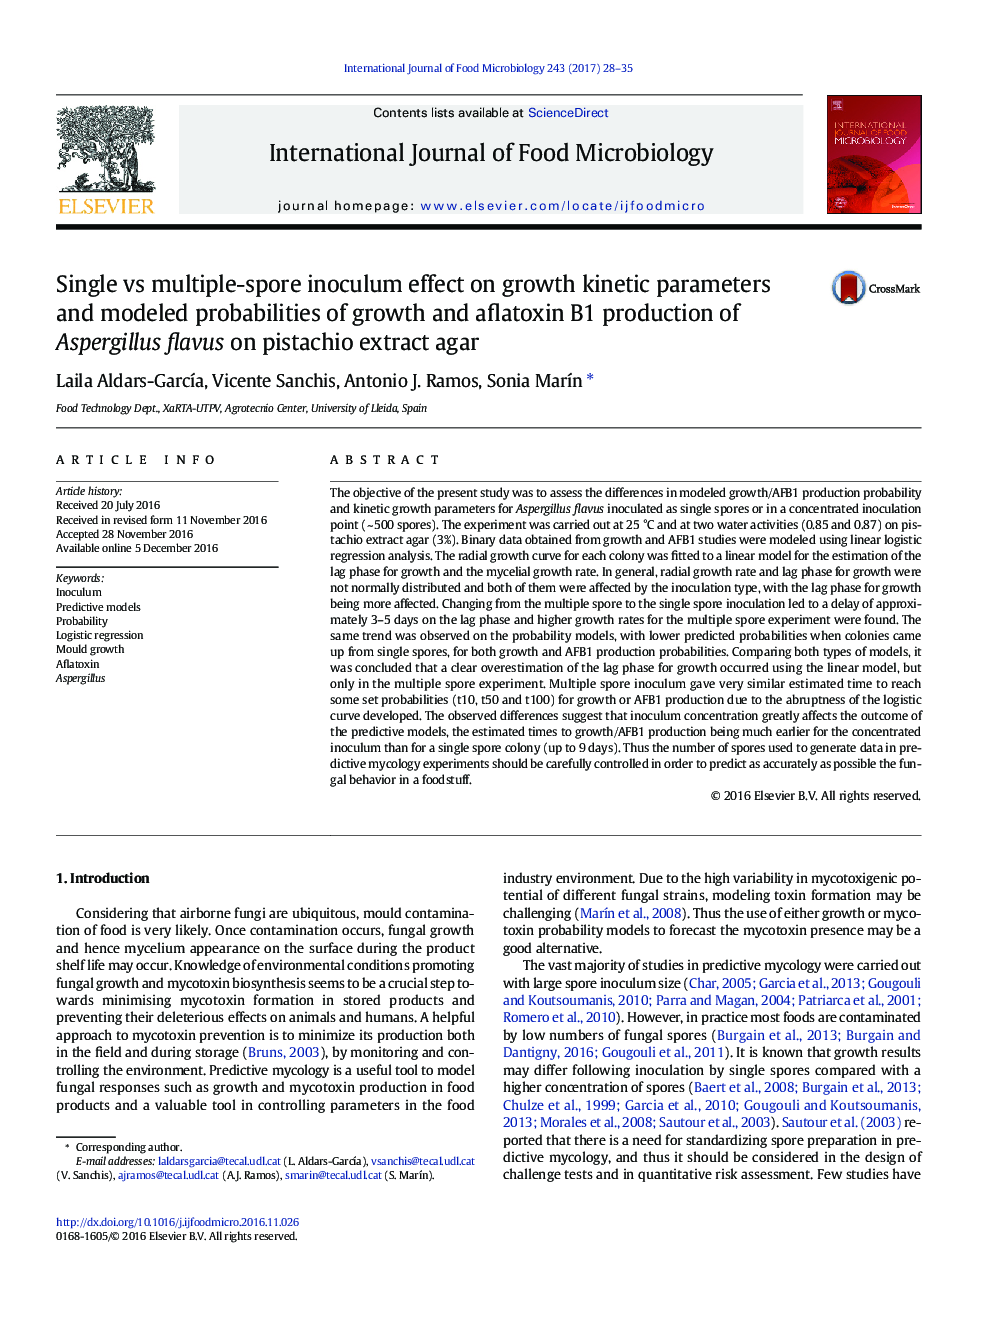 Single vs multiple-spore inoculum effect on growth kinetic parameters and modeled probabilities of growth and aflatoxin B1 production of Aspergillus flavus on pistachio extract agar